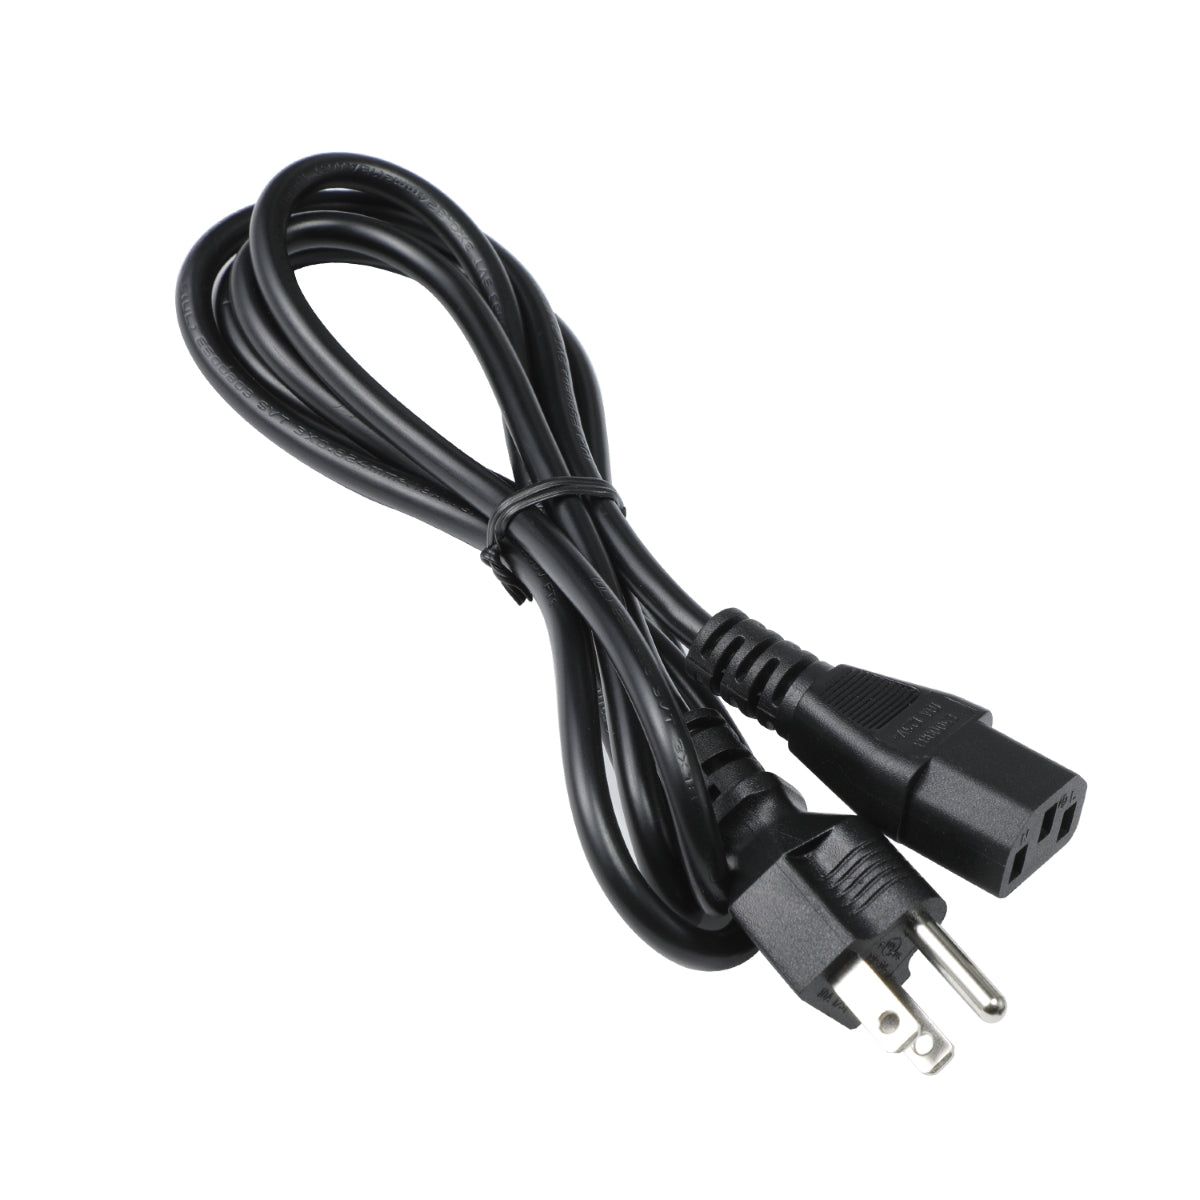 Power Cord for ViewSonic VG2755 Display Monitor